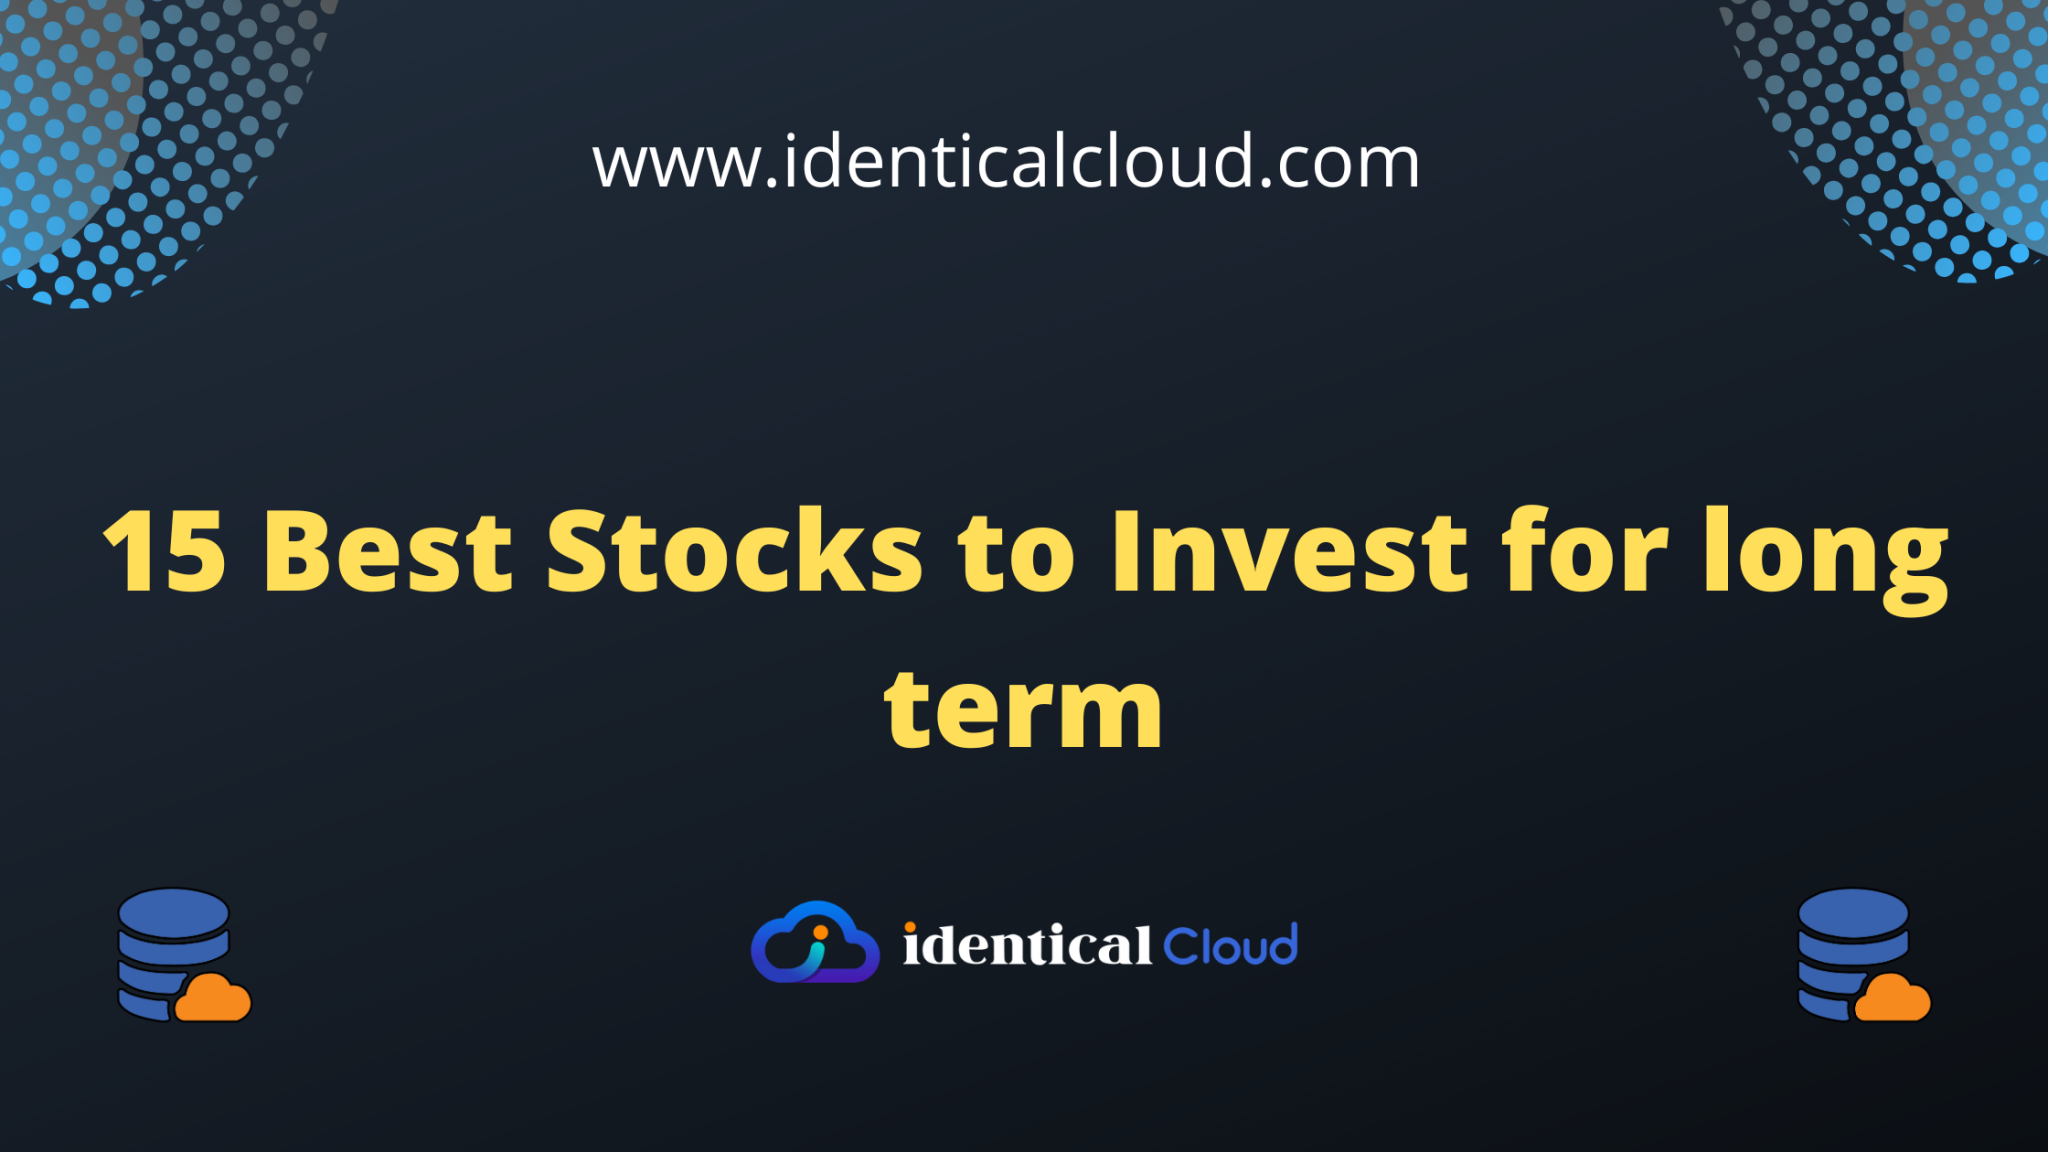 15 Best Stocks to Invest for long term identical Cloud